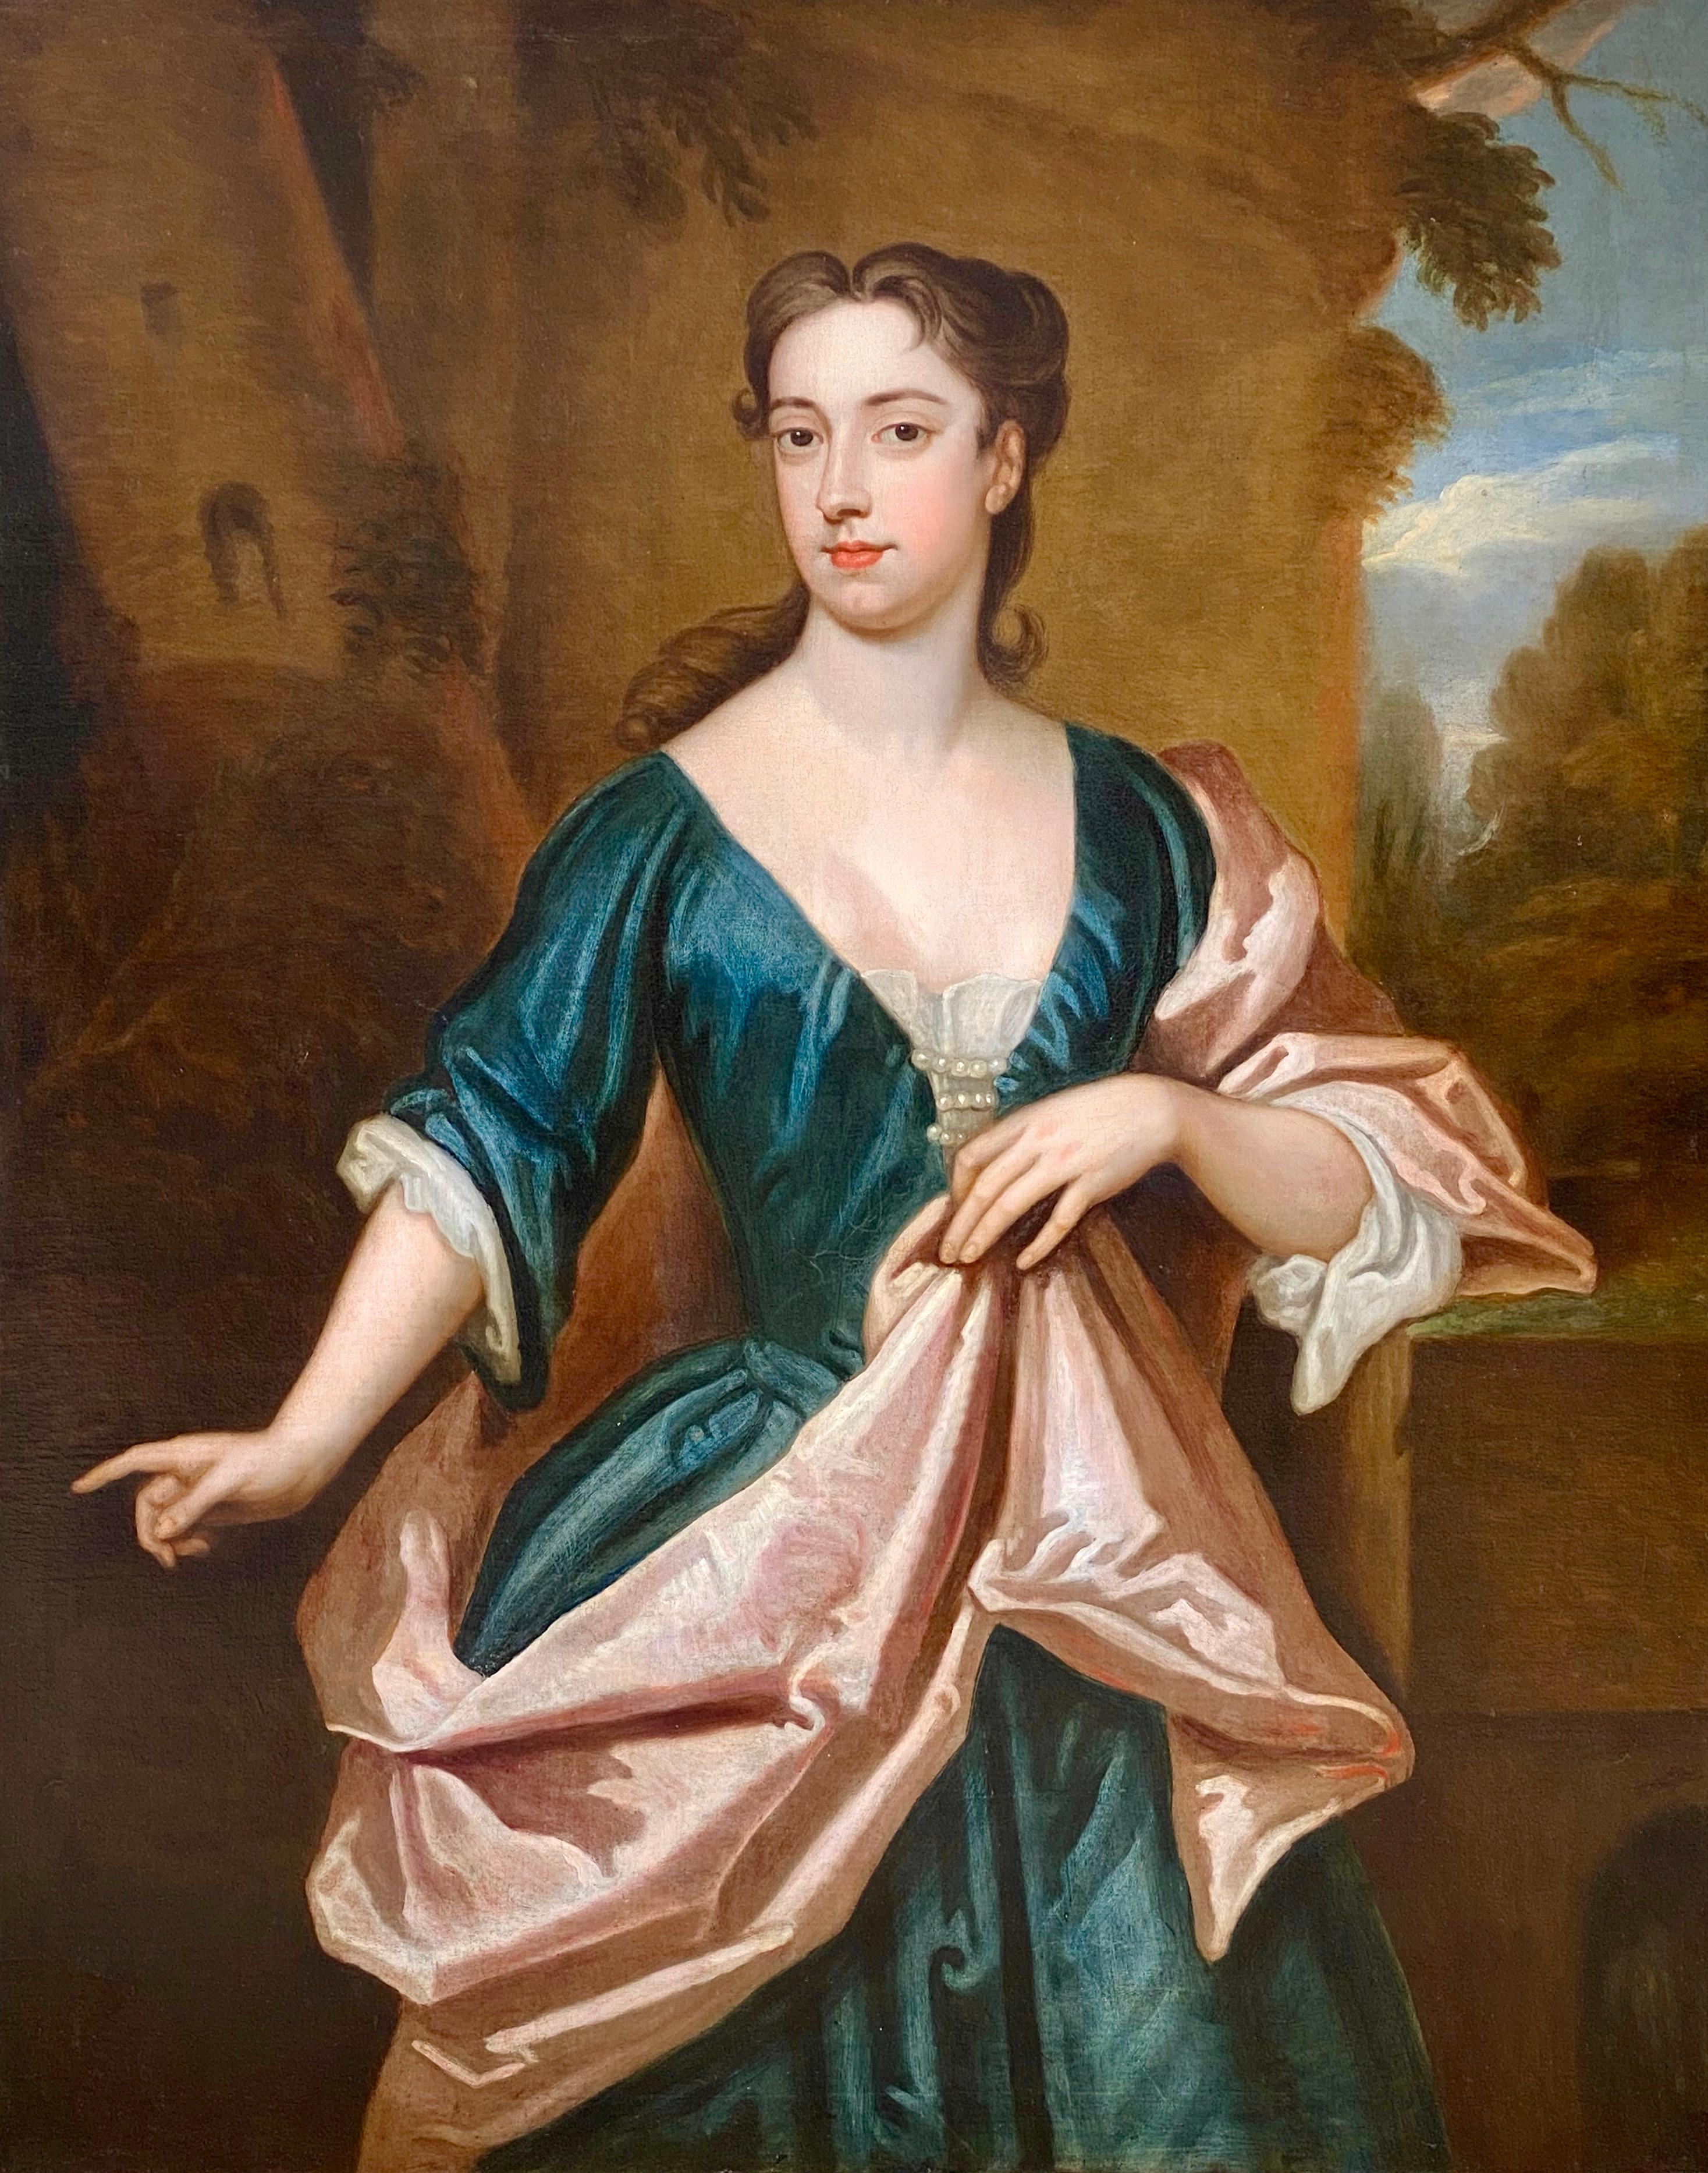 EARLY 18TH CENTURY ENGLISH PORTRAIT OF A LADY - CIRCLE OF SIR GODFREY KNELLER. - Painting by (Circle of) Godfrey Kneller